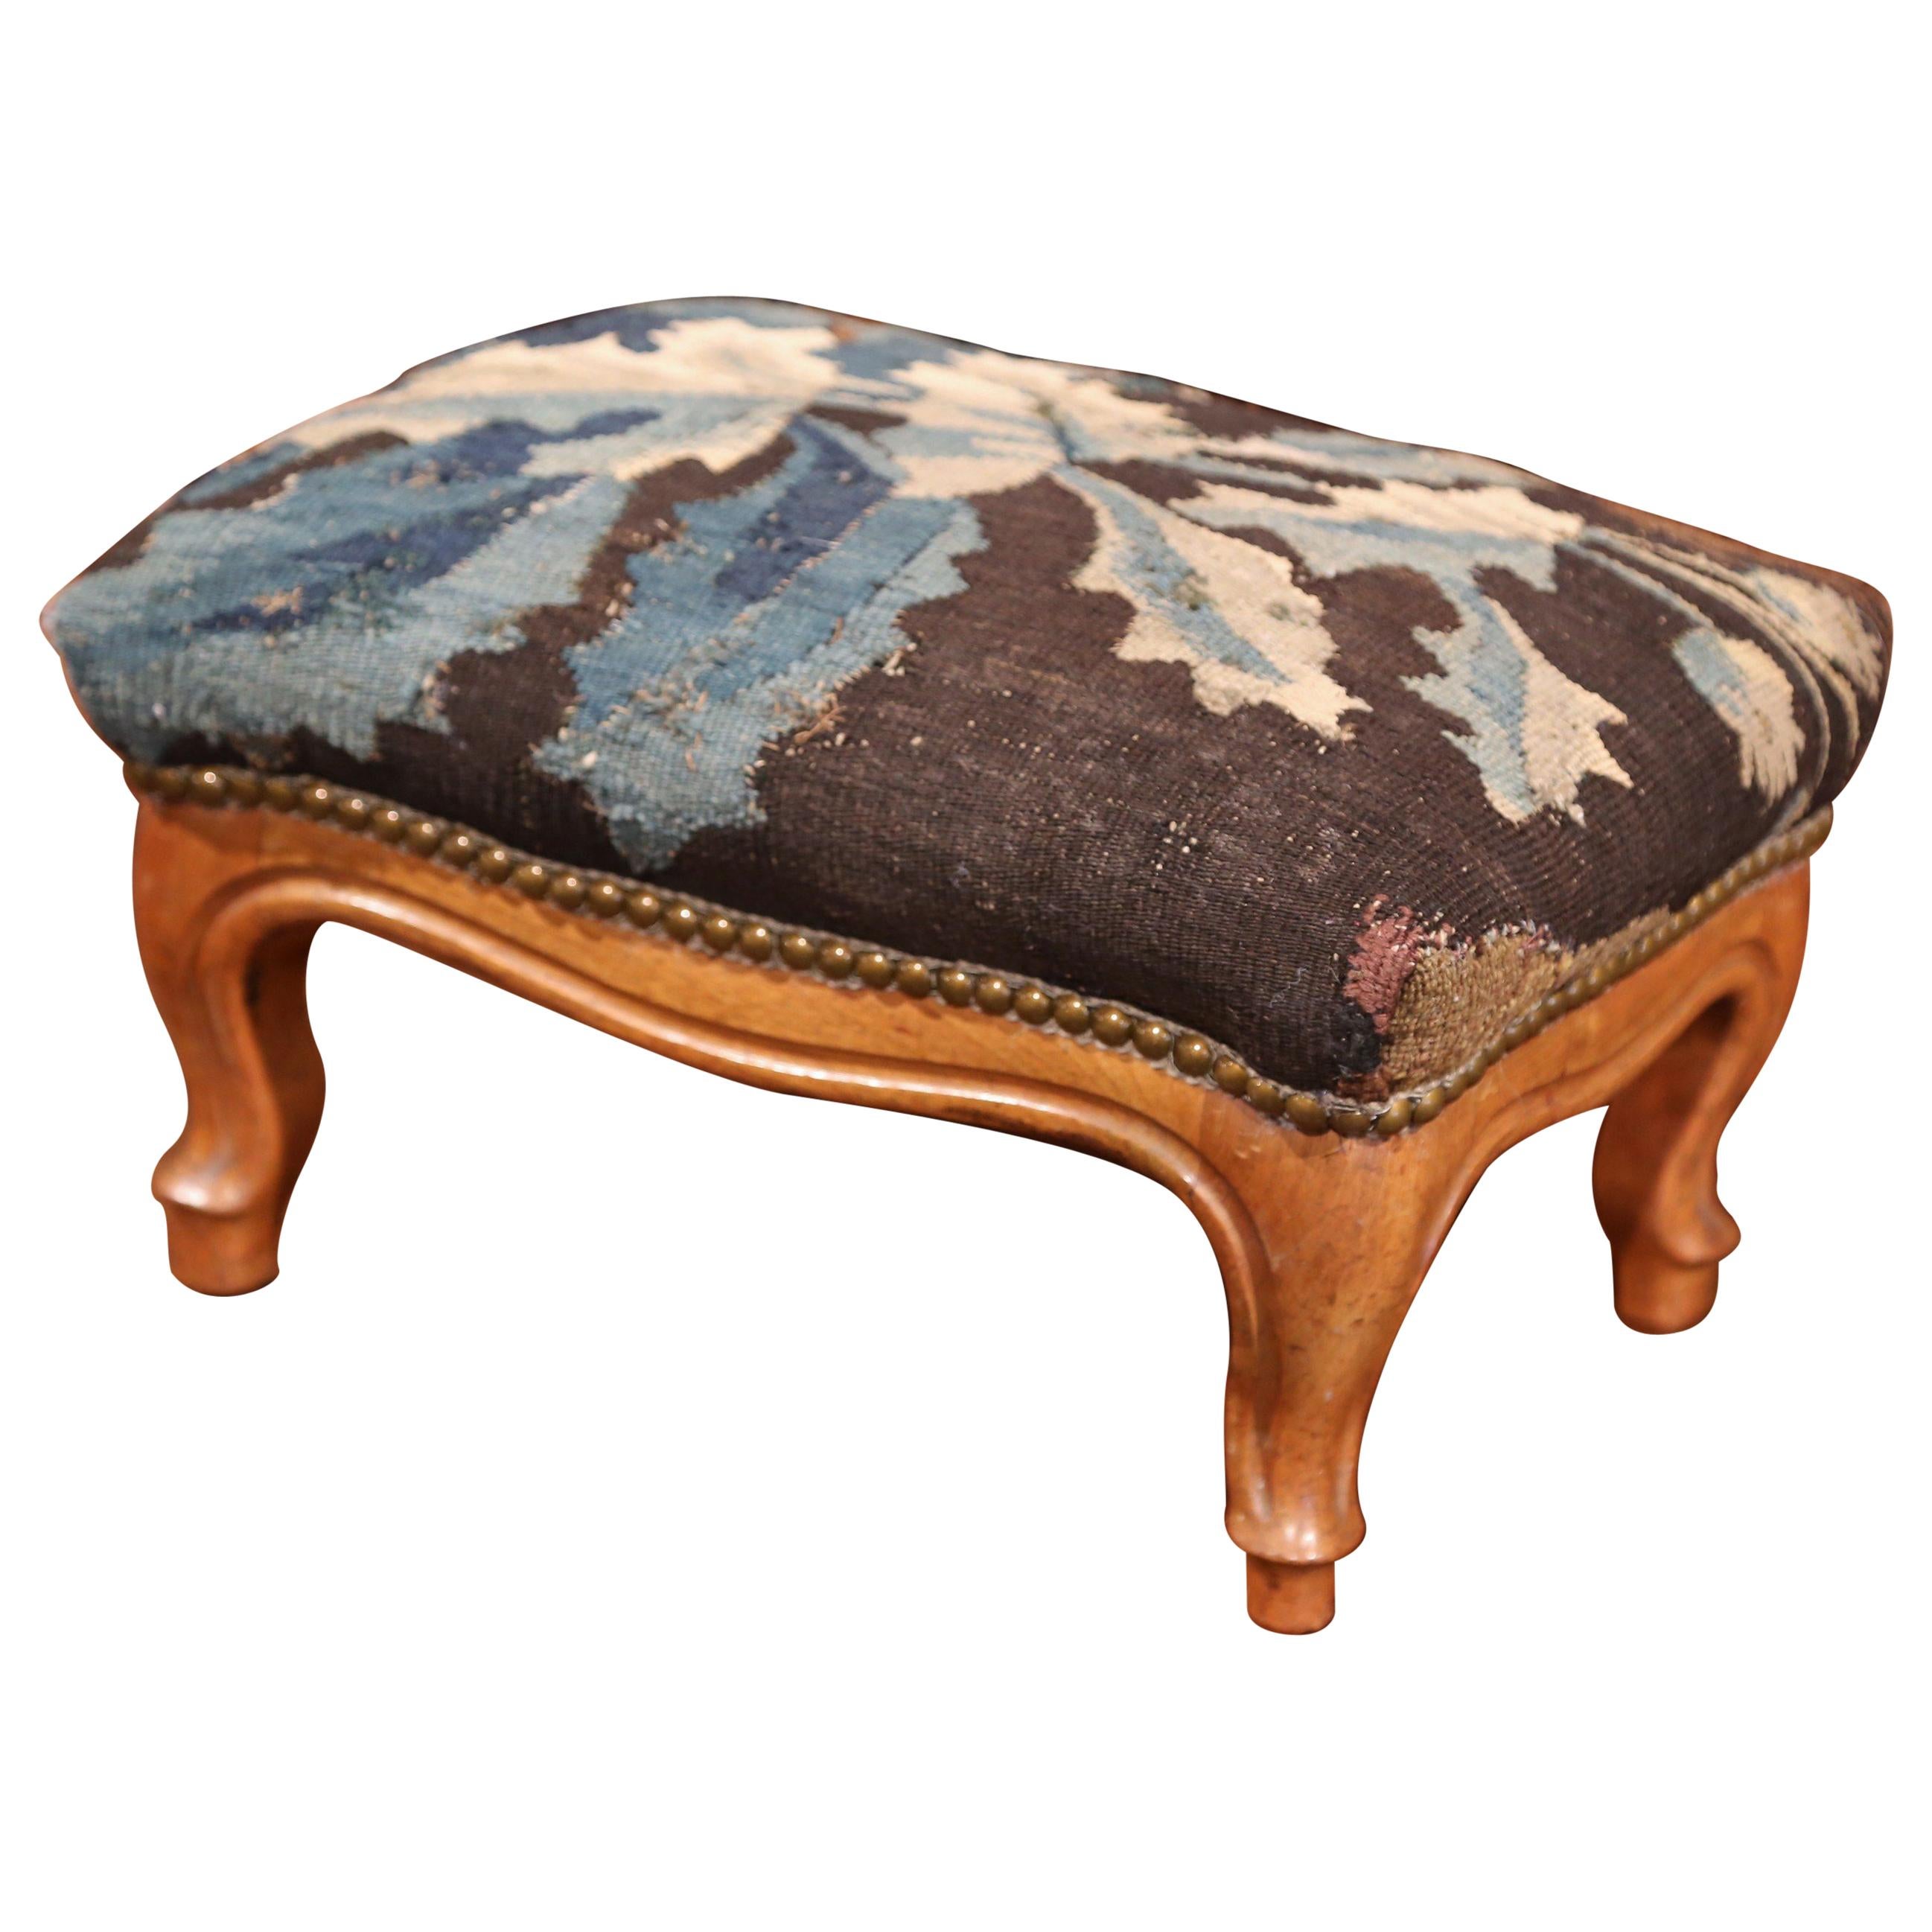 19th Century French Carved Walnut Footstool with 18th Century Aubusson Tapestry